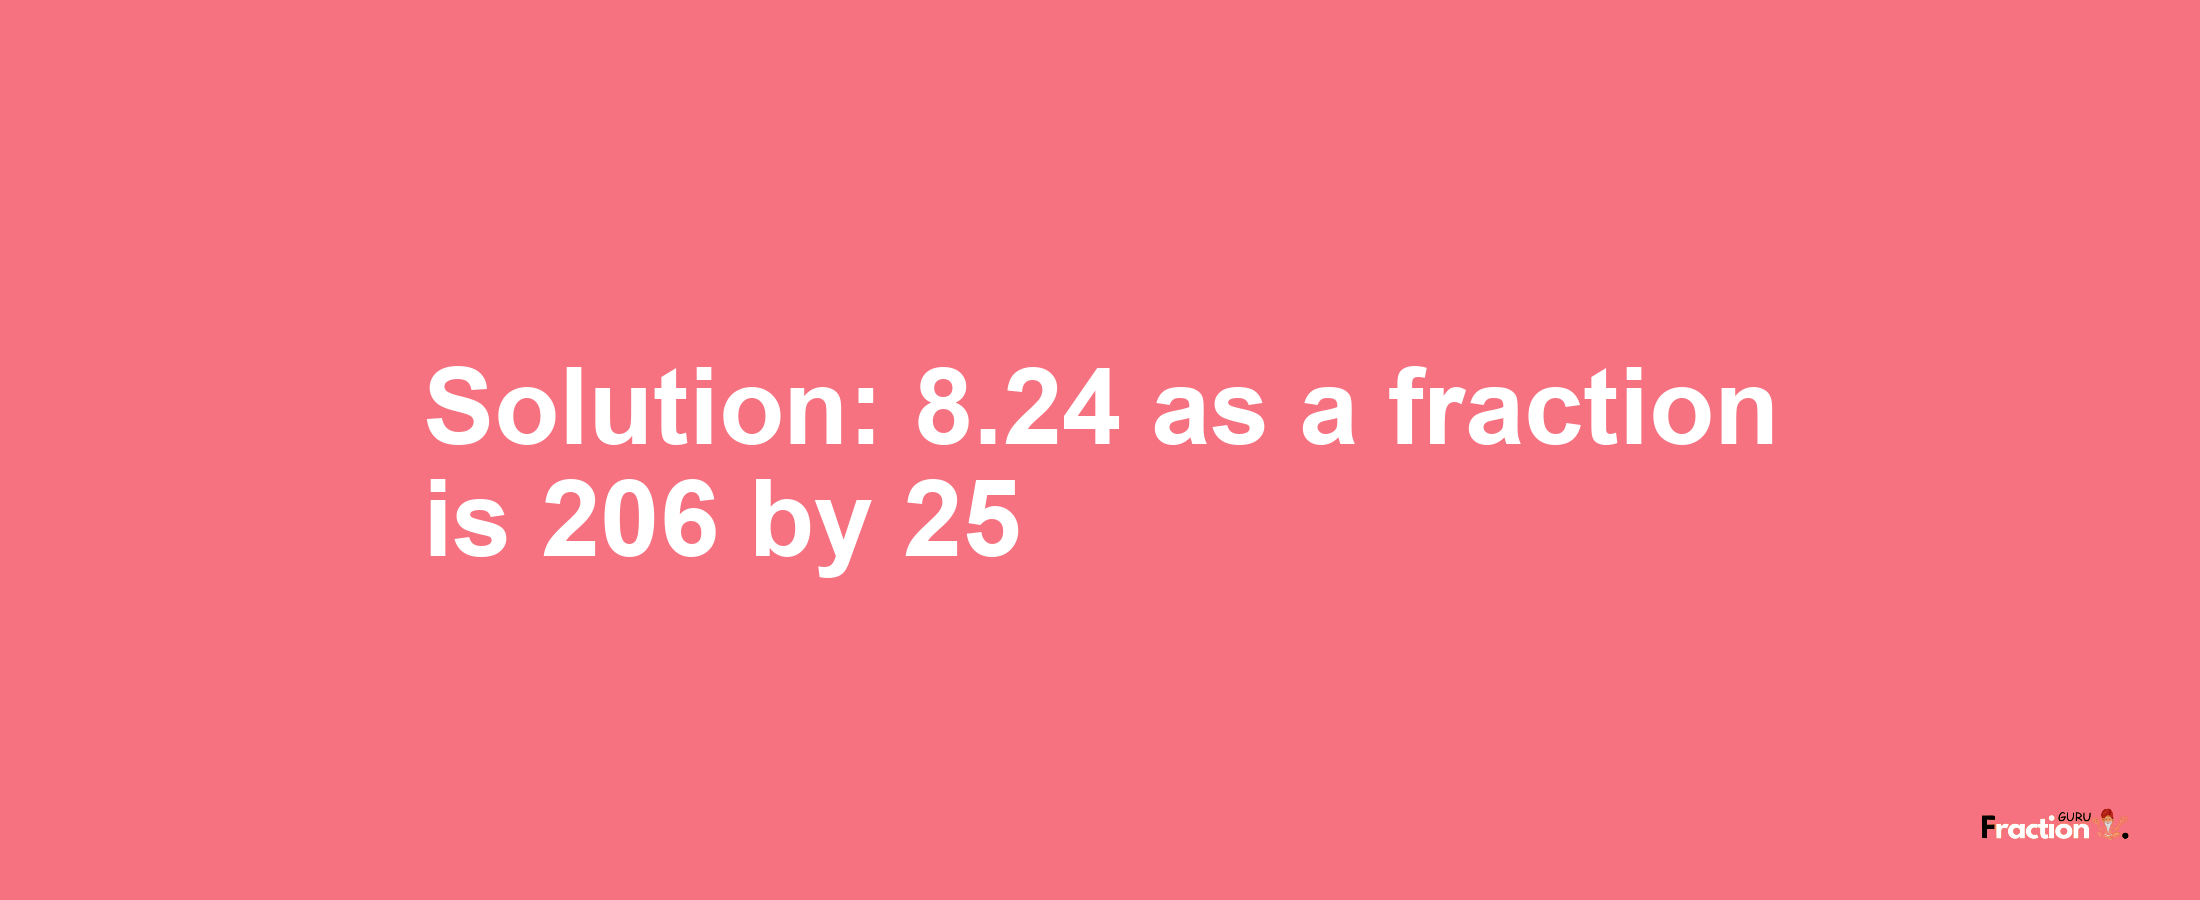 Solution:8.24 as a fraction is 206/25